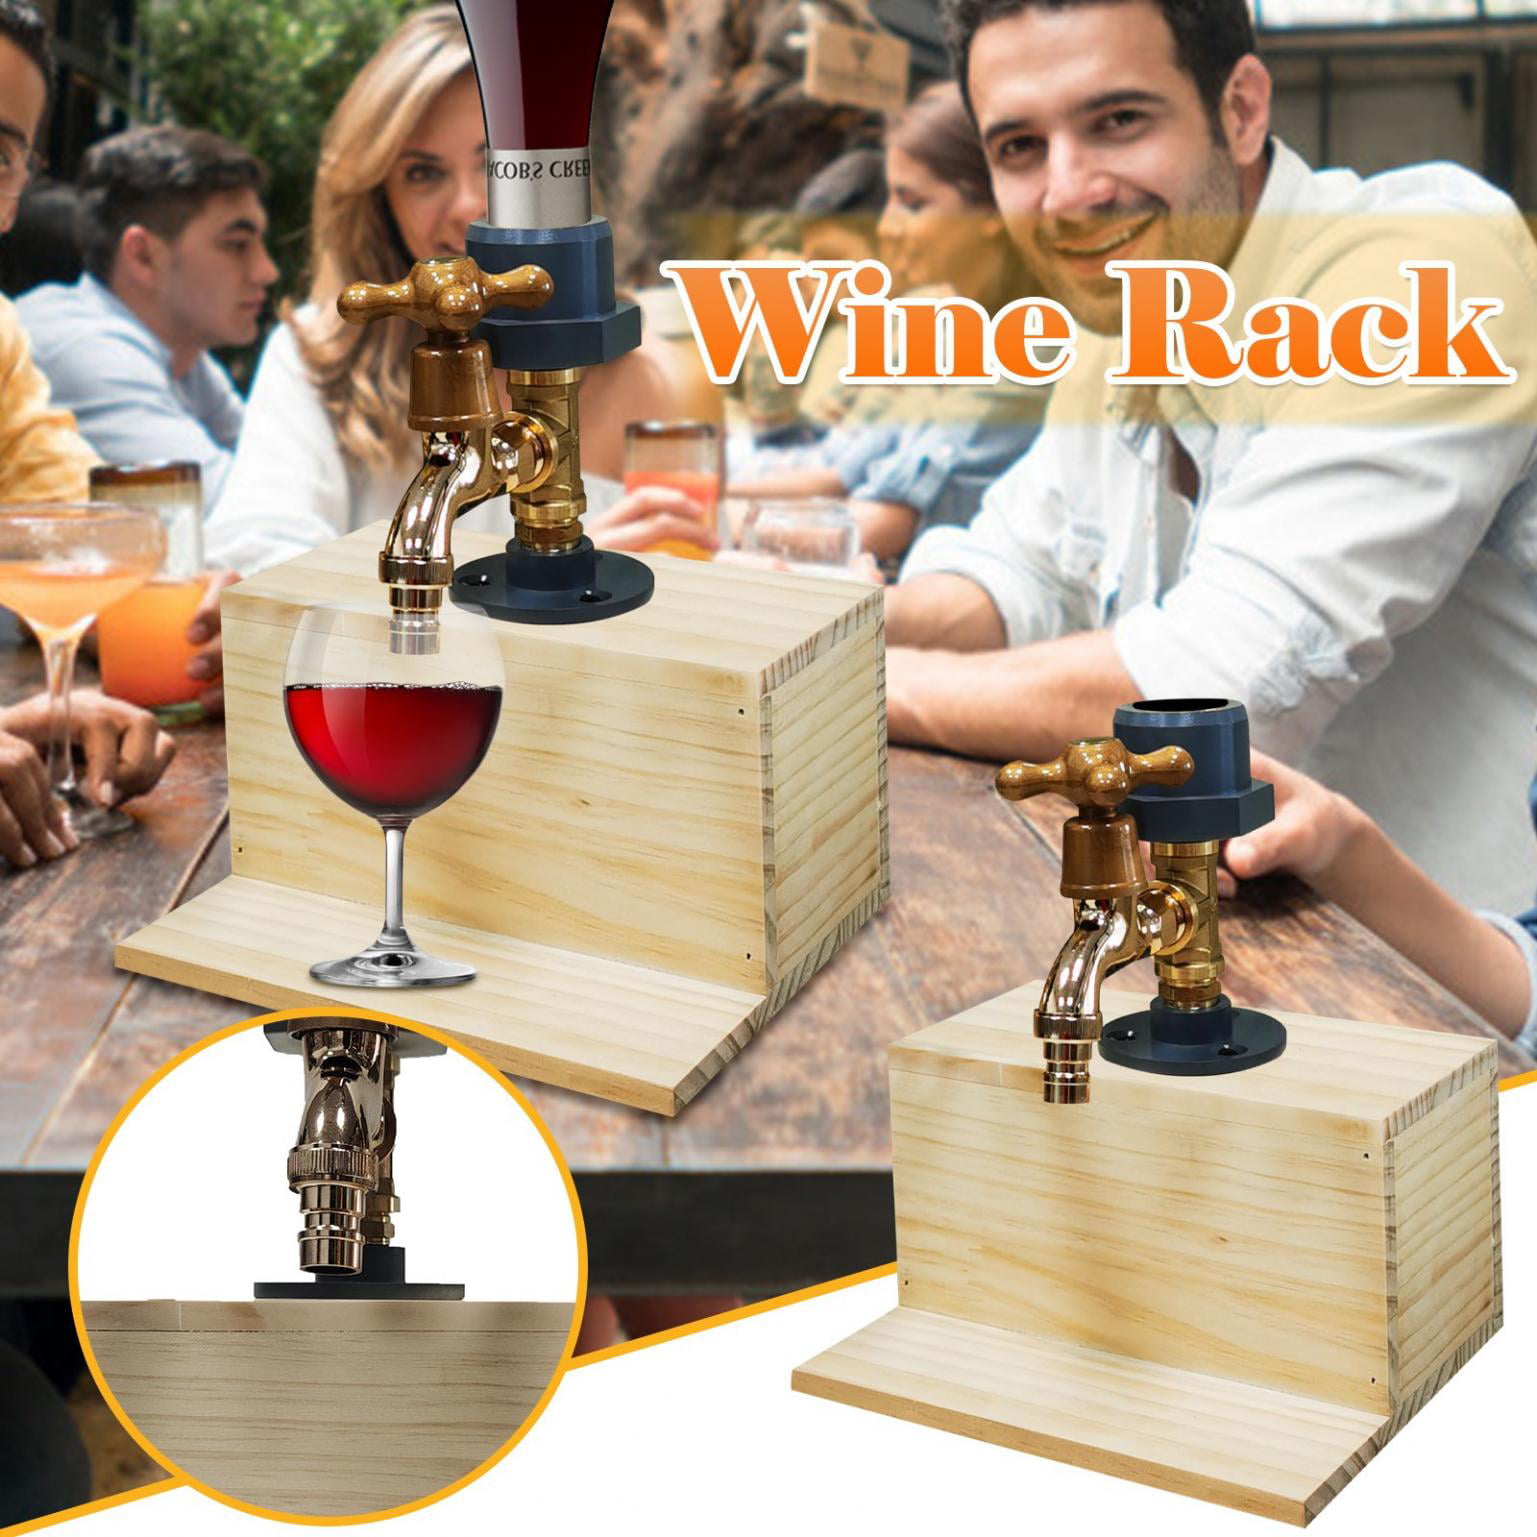 Best GIft for Dad Papa Boyfriend Husband Double Dispenser Fathers Day Gift Faucet Shape Liquor Dispenser Daddy Favorite Whiskey Alcohol Wine Wood Dispenser for Home Bar Dinner Party Restaurant 